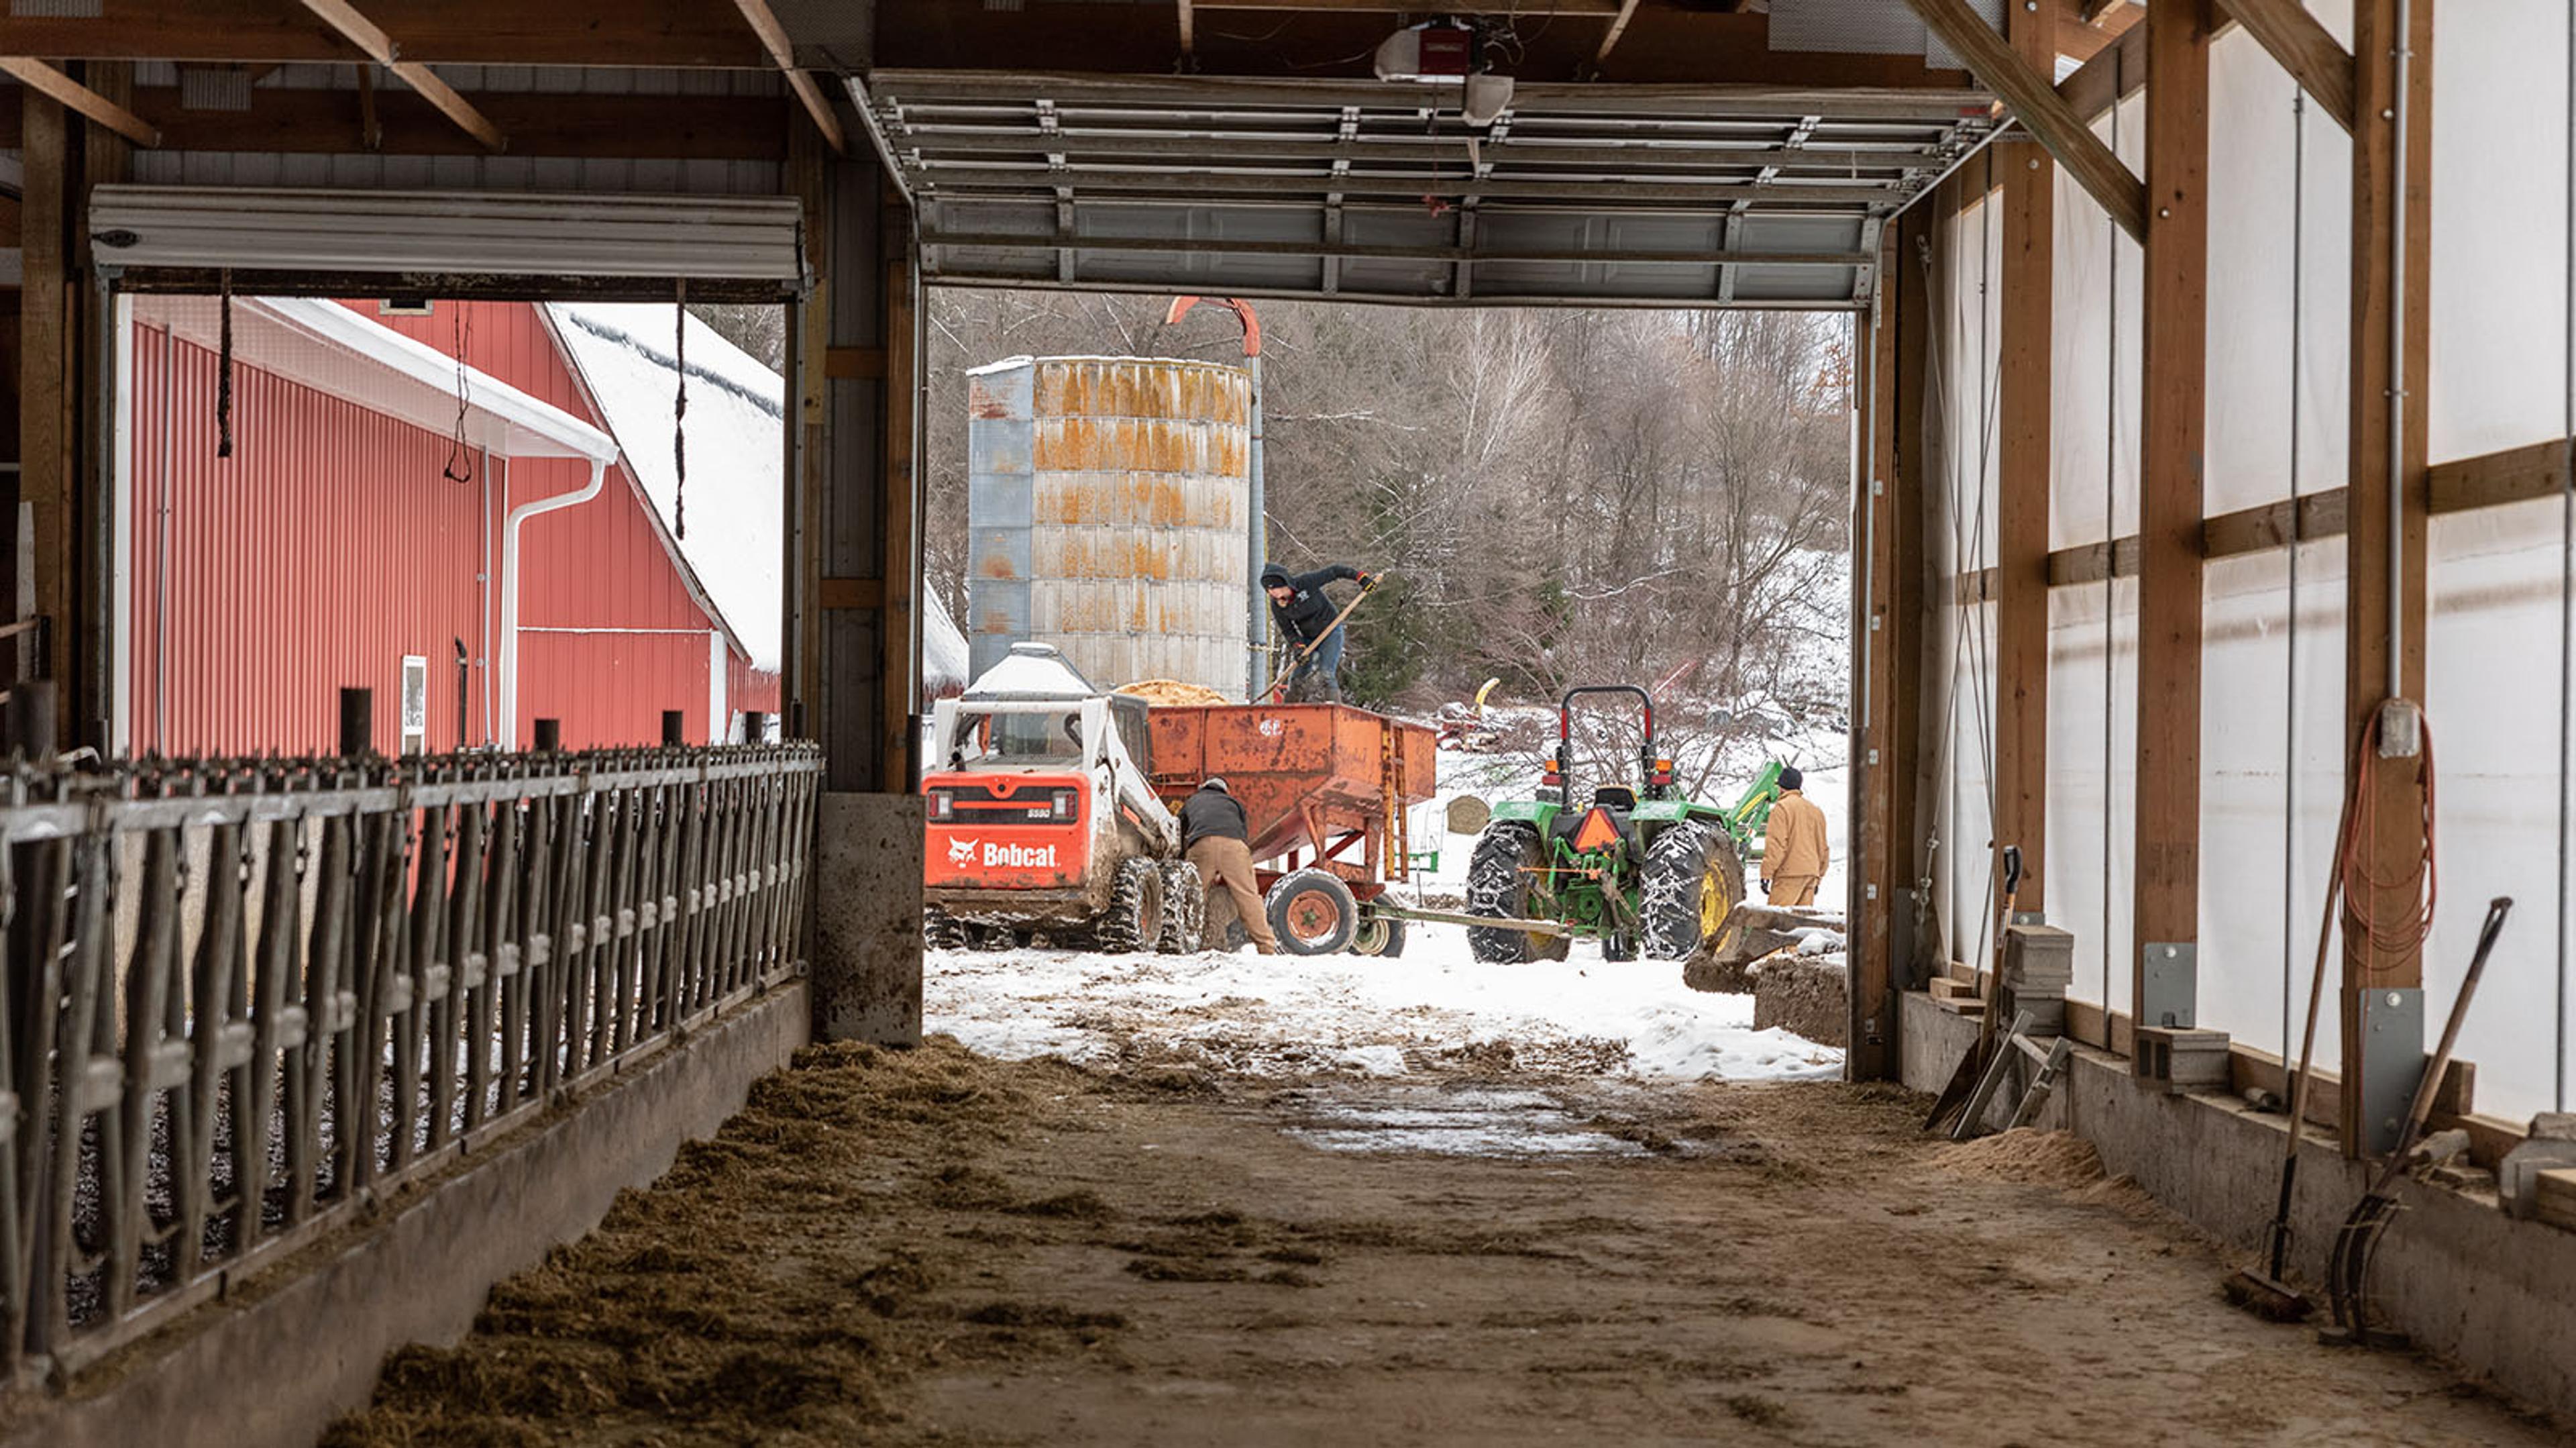 View from within the barn of farmers bringing a trailer close to the barn and standing on top to shovel bedding out. 